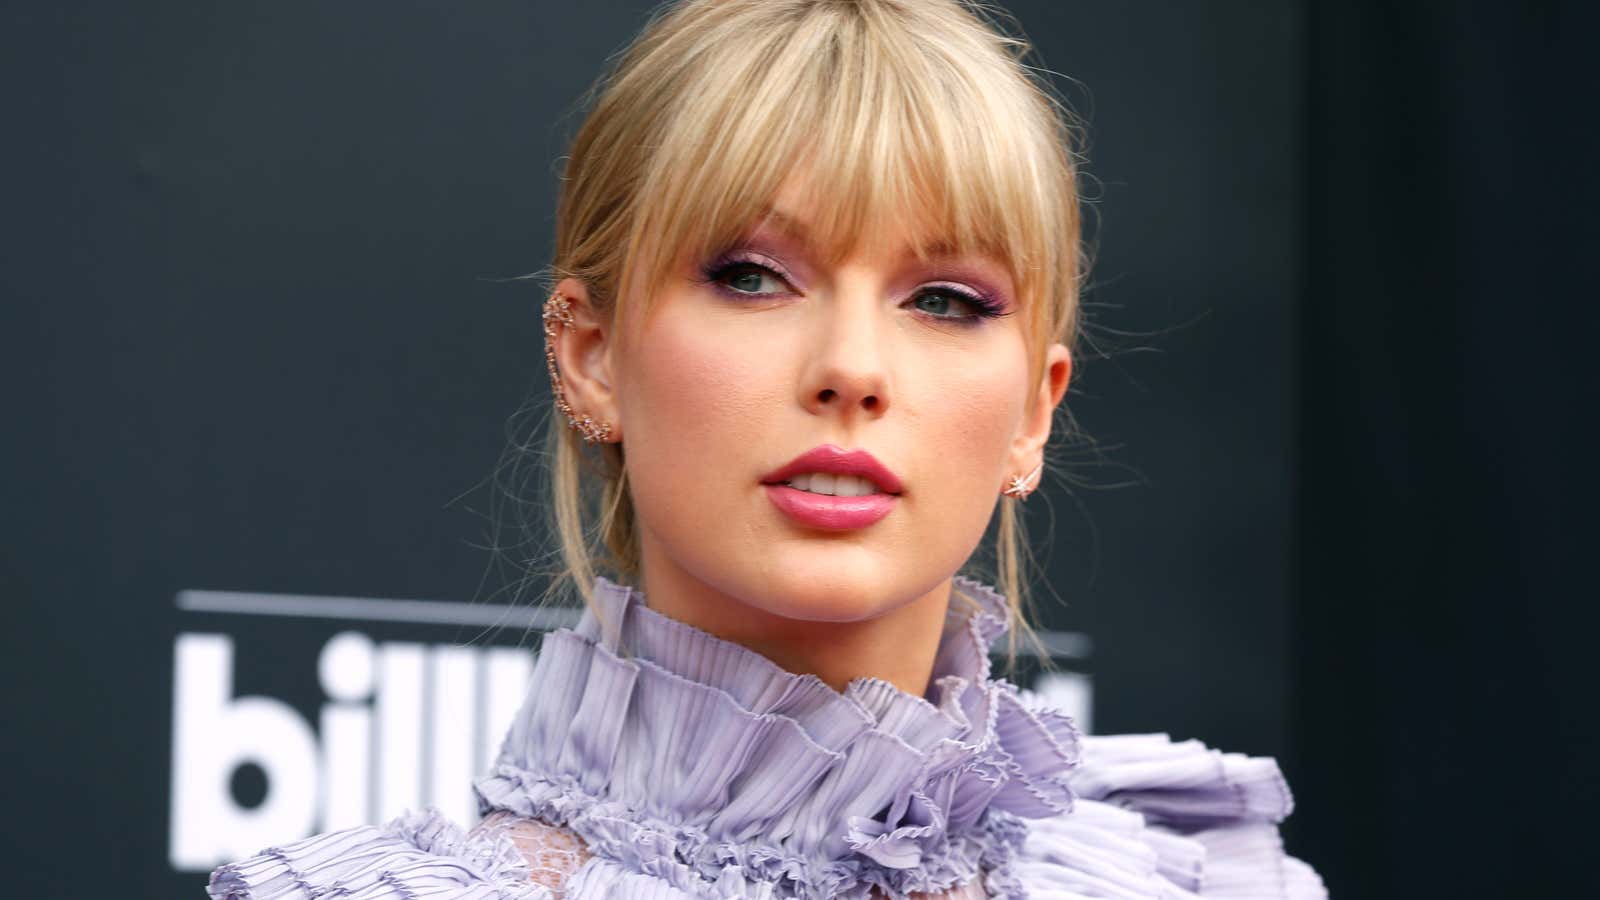 Taylor Swift's new album Lover proves she can still sell CDs